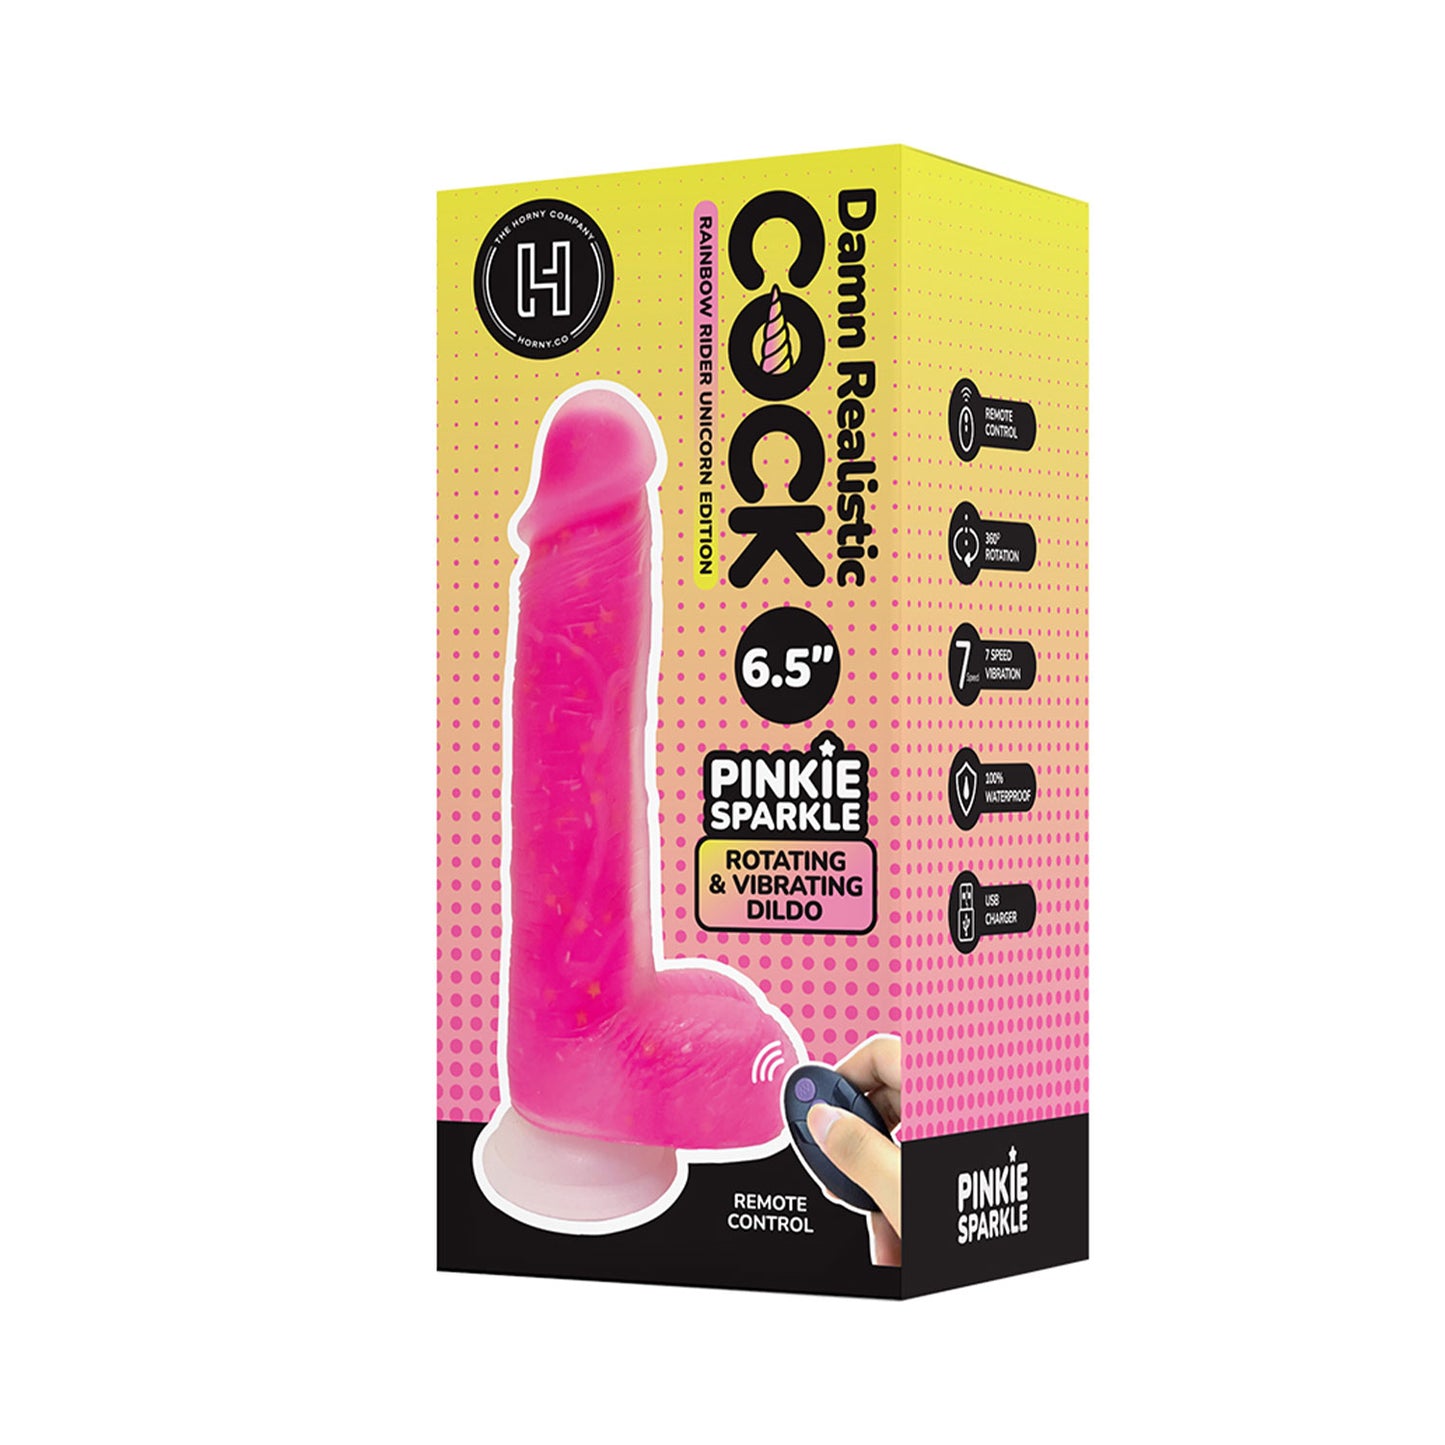 The Horny Company - Damn Realistic Cock 6.5" Remote-Controlled Rotating and Vibrating Dual Density Silicone Dildo Pinkie Sparkle